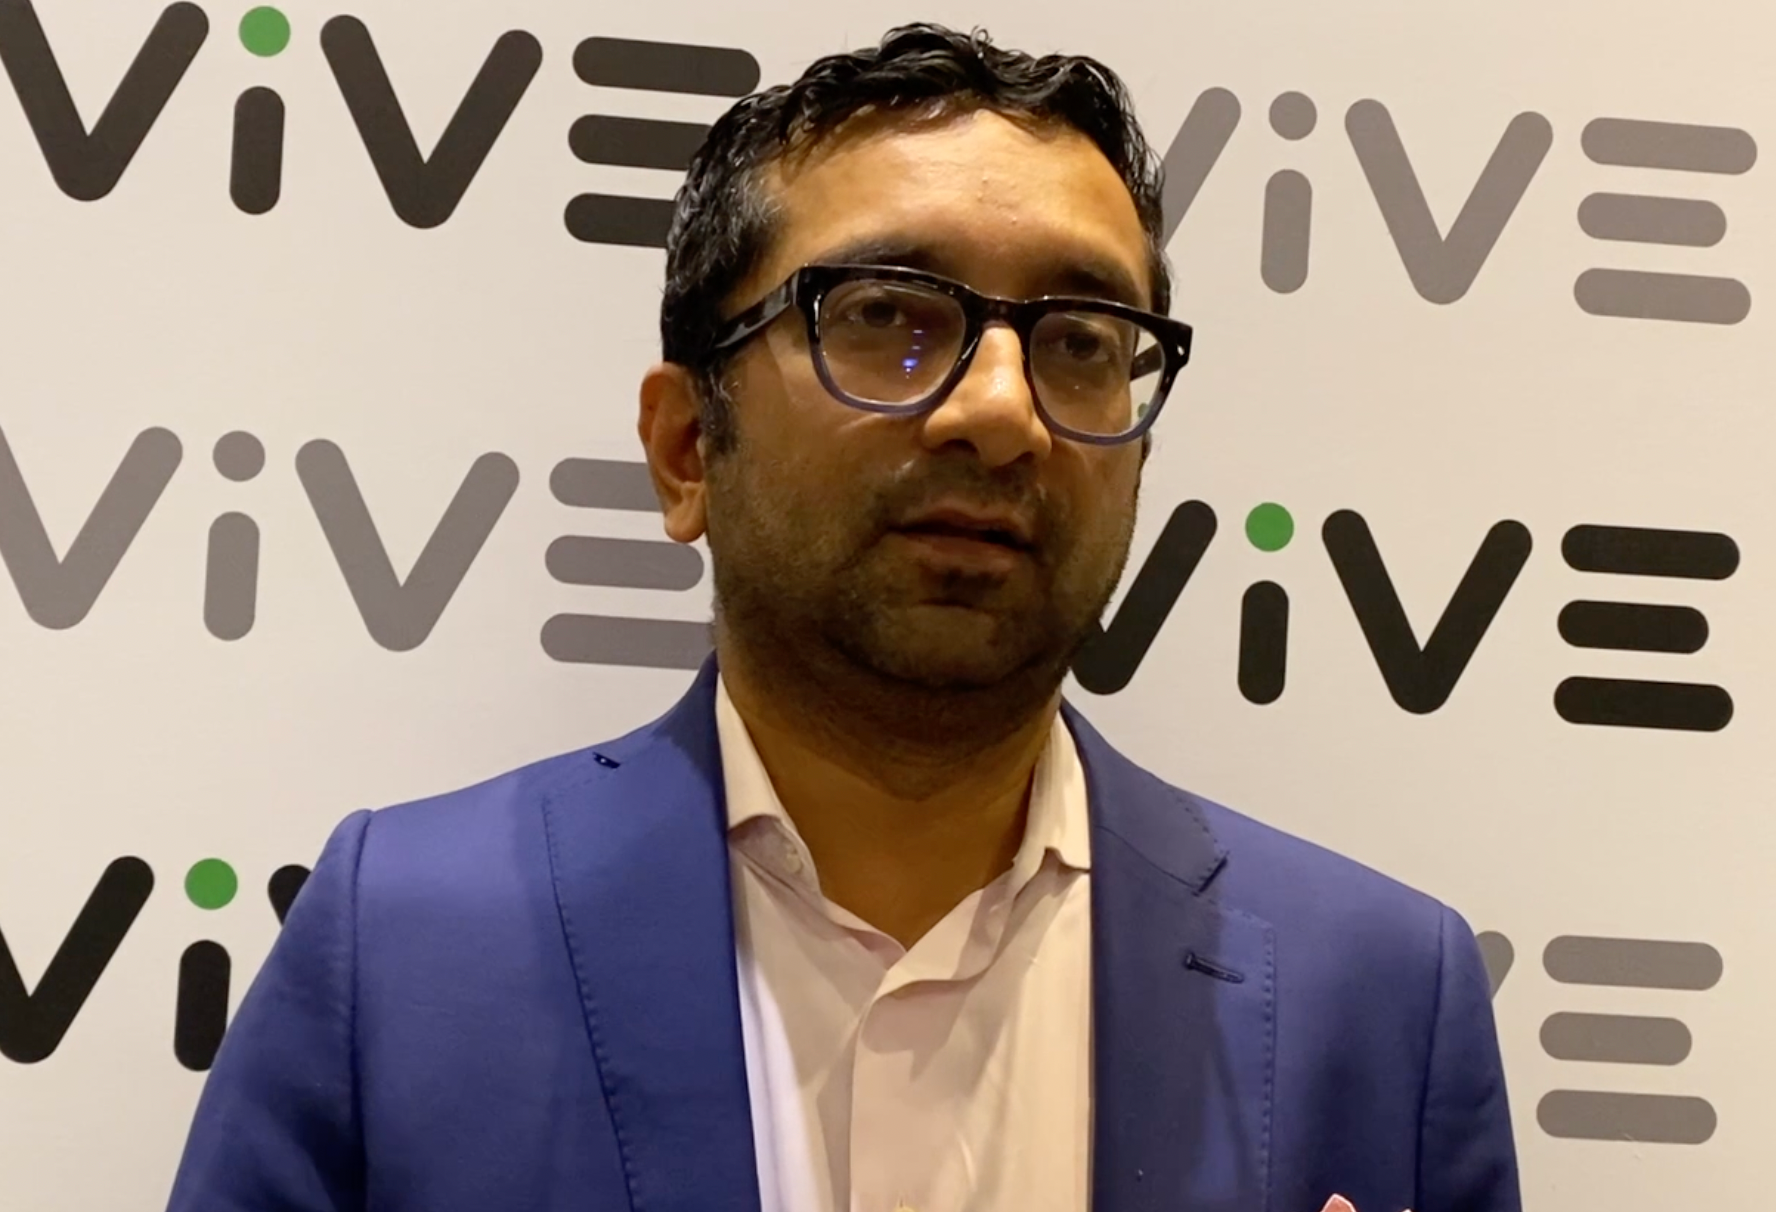 Jay Bhatt of Deloitte: Health equity ‘can’t be a side hustle’ | ViVE Conference